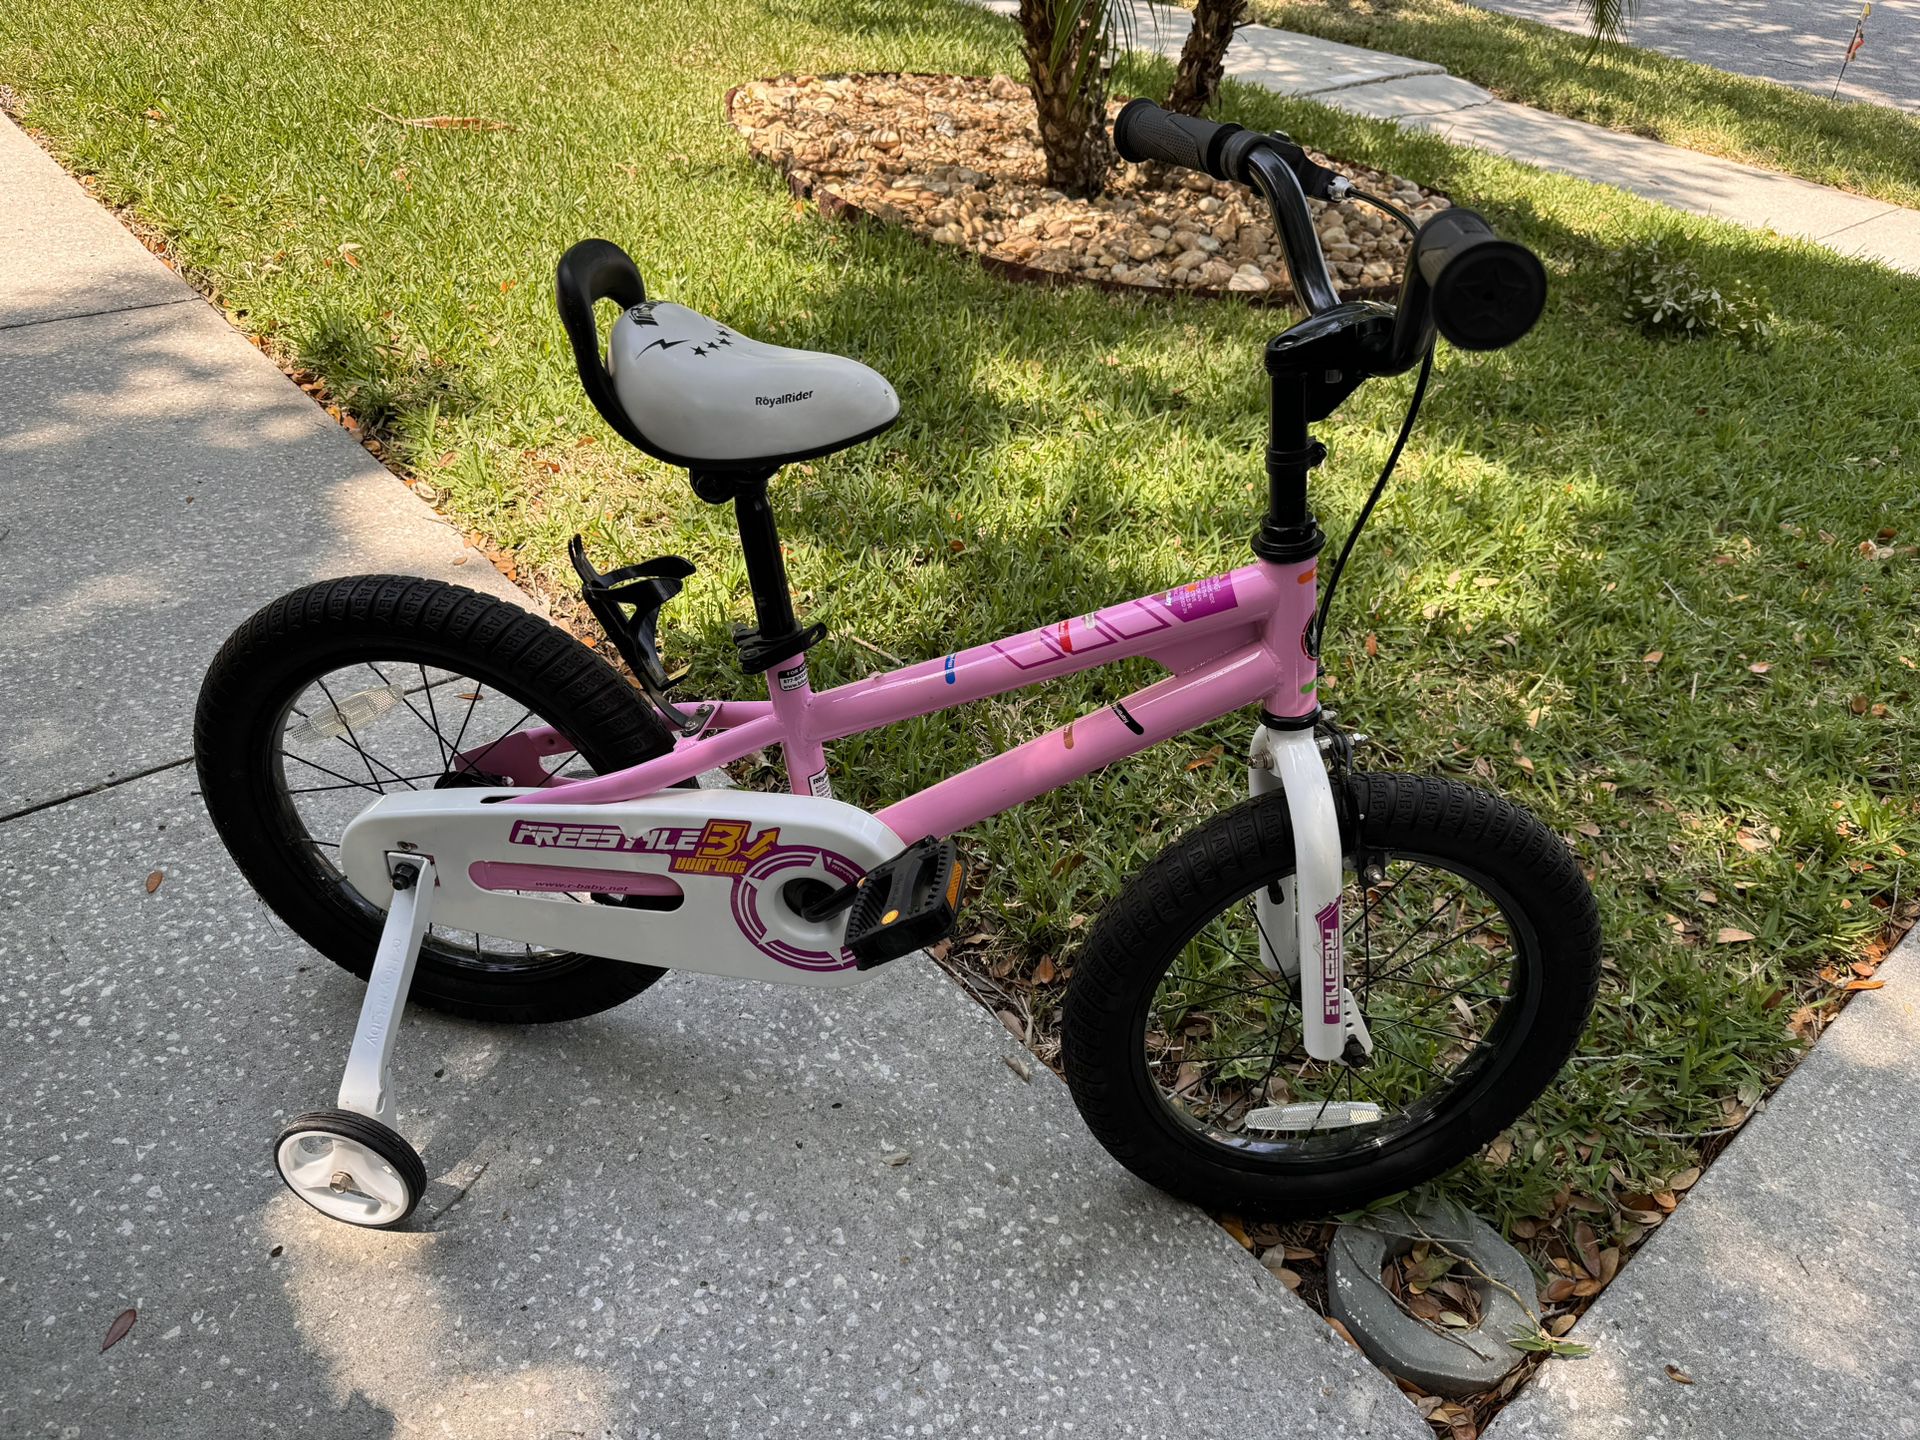 Royalbaby Freestyle Kids Bike 16 Inch Bicycle for Boys Girls Ages 3-9 Years